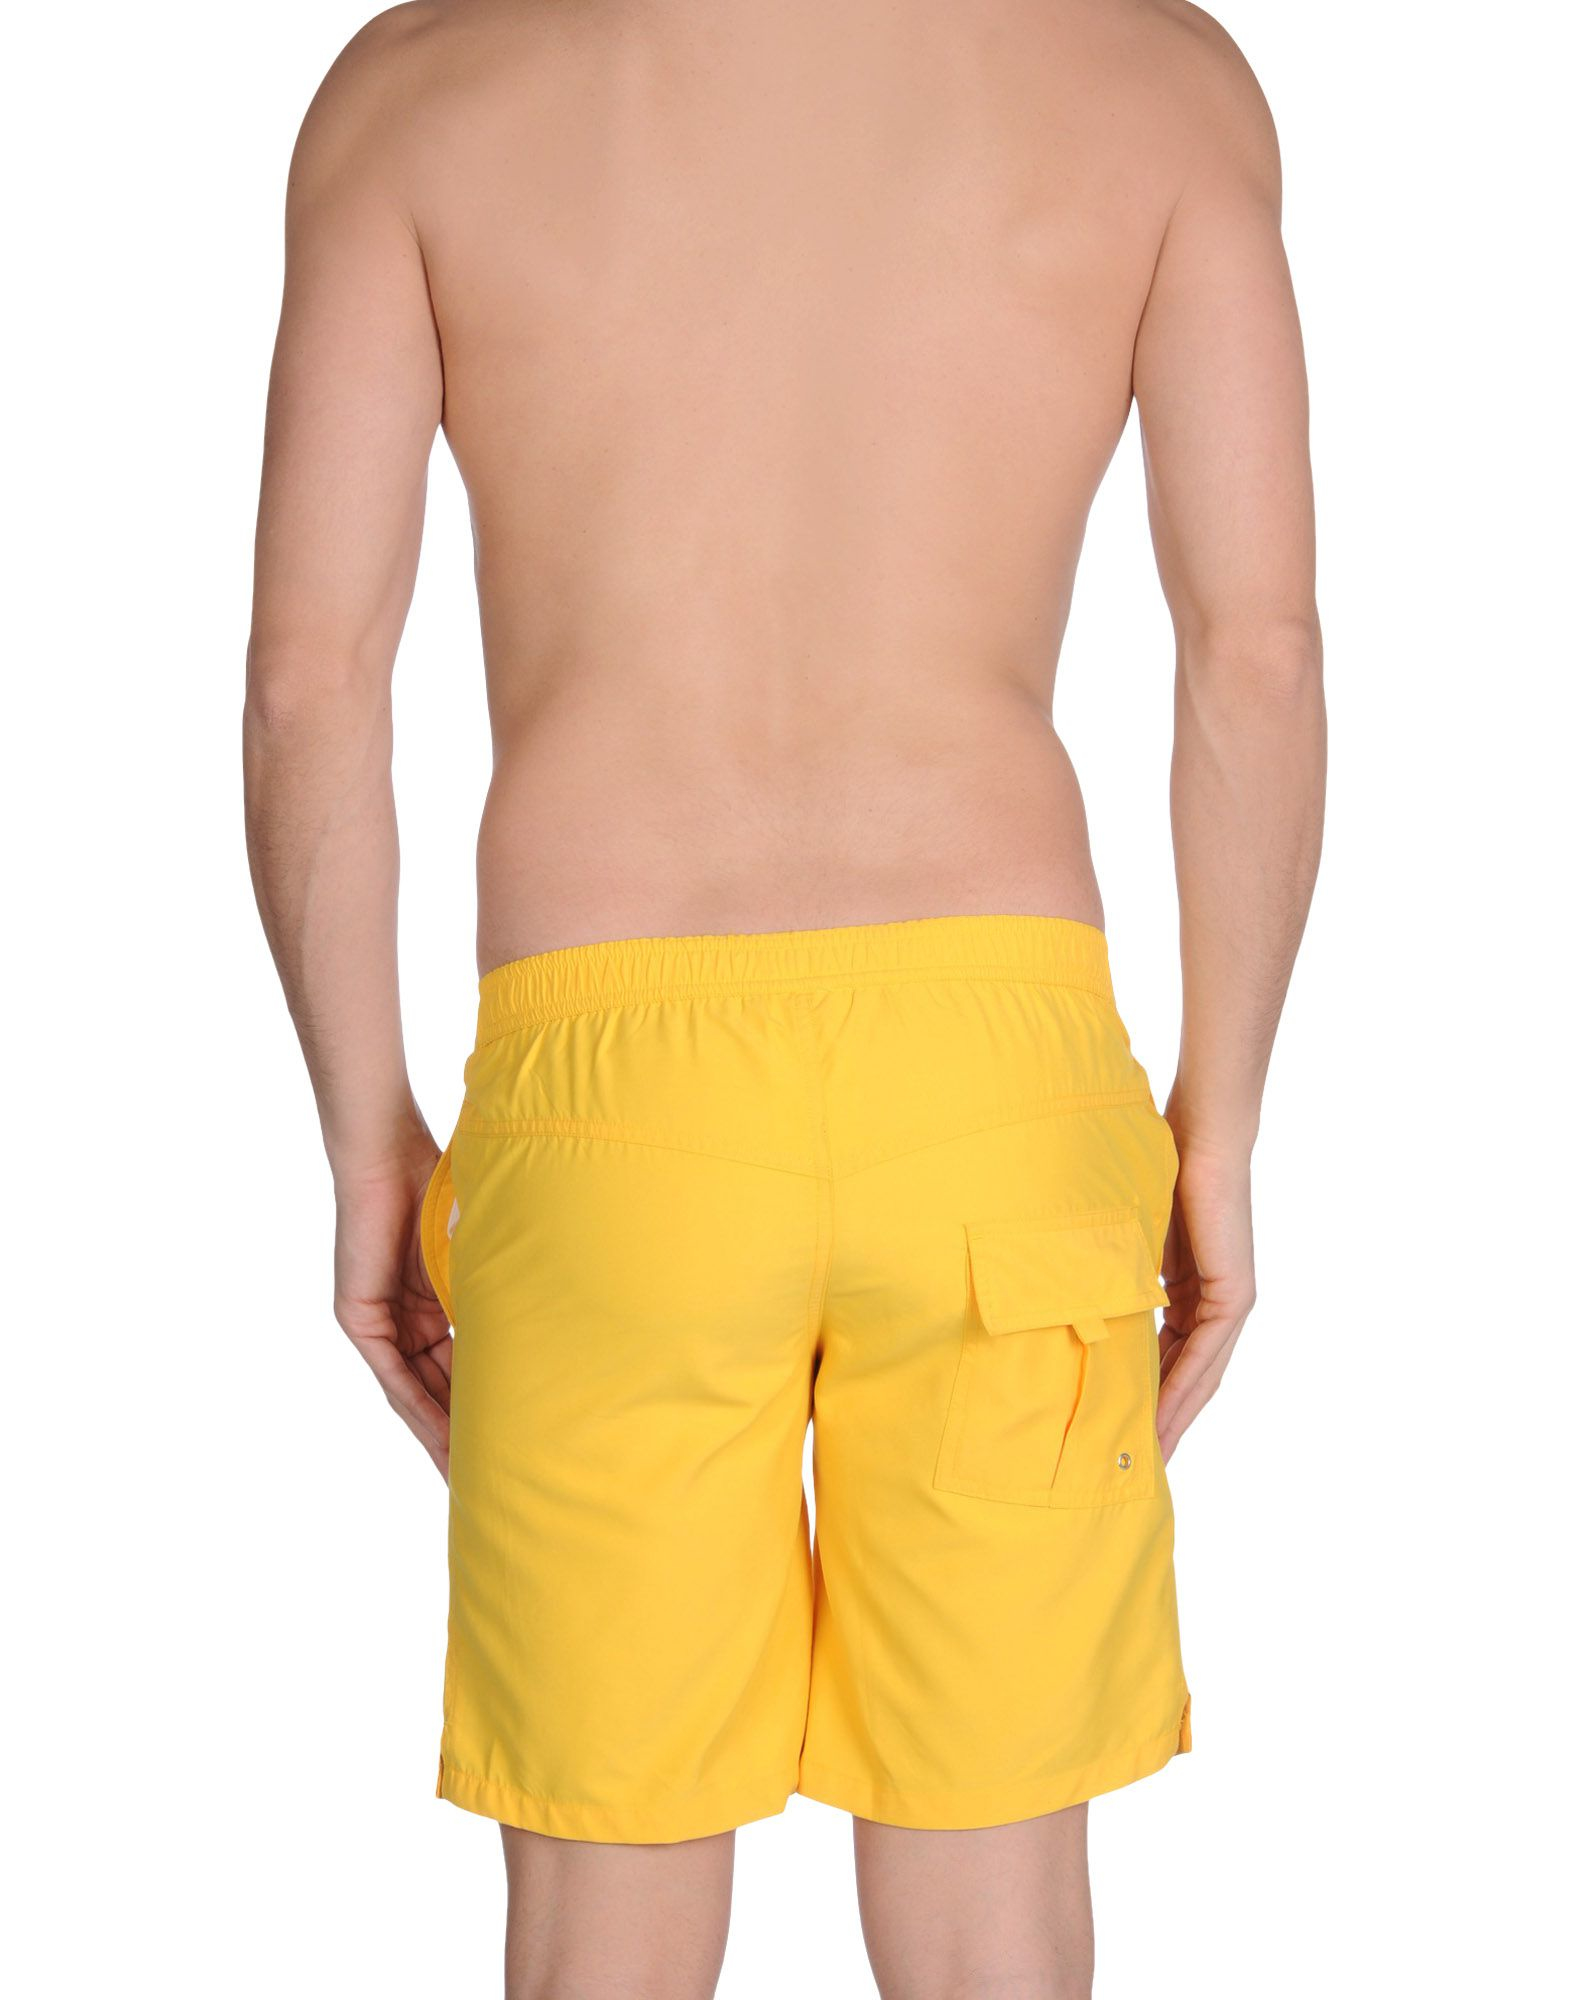 Replay Synthetic Swimming Trunk in Yellow for Men - Lyst